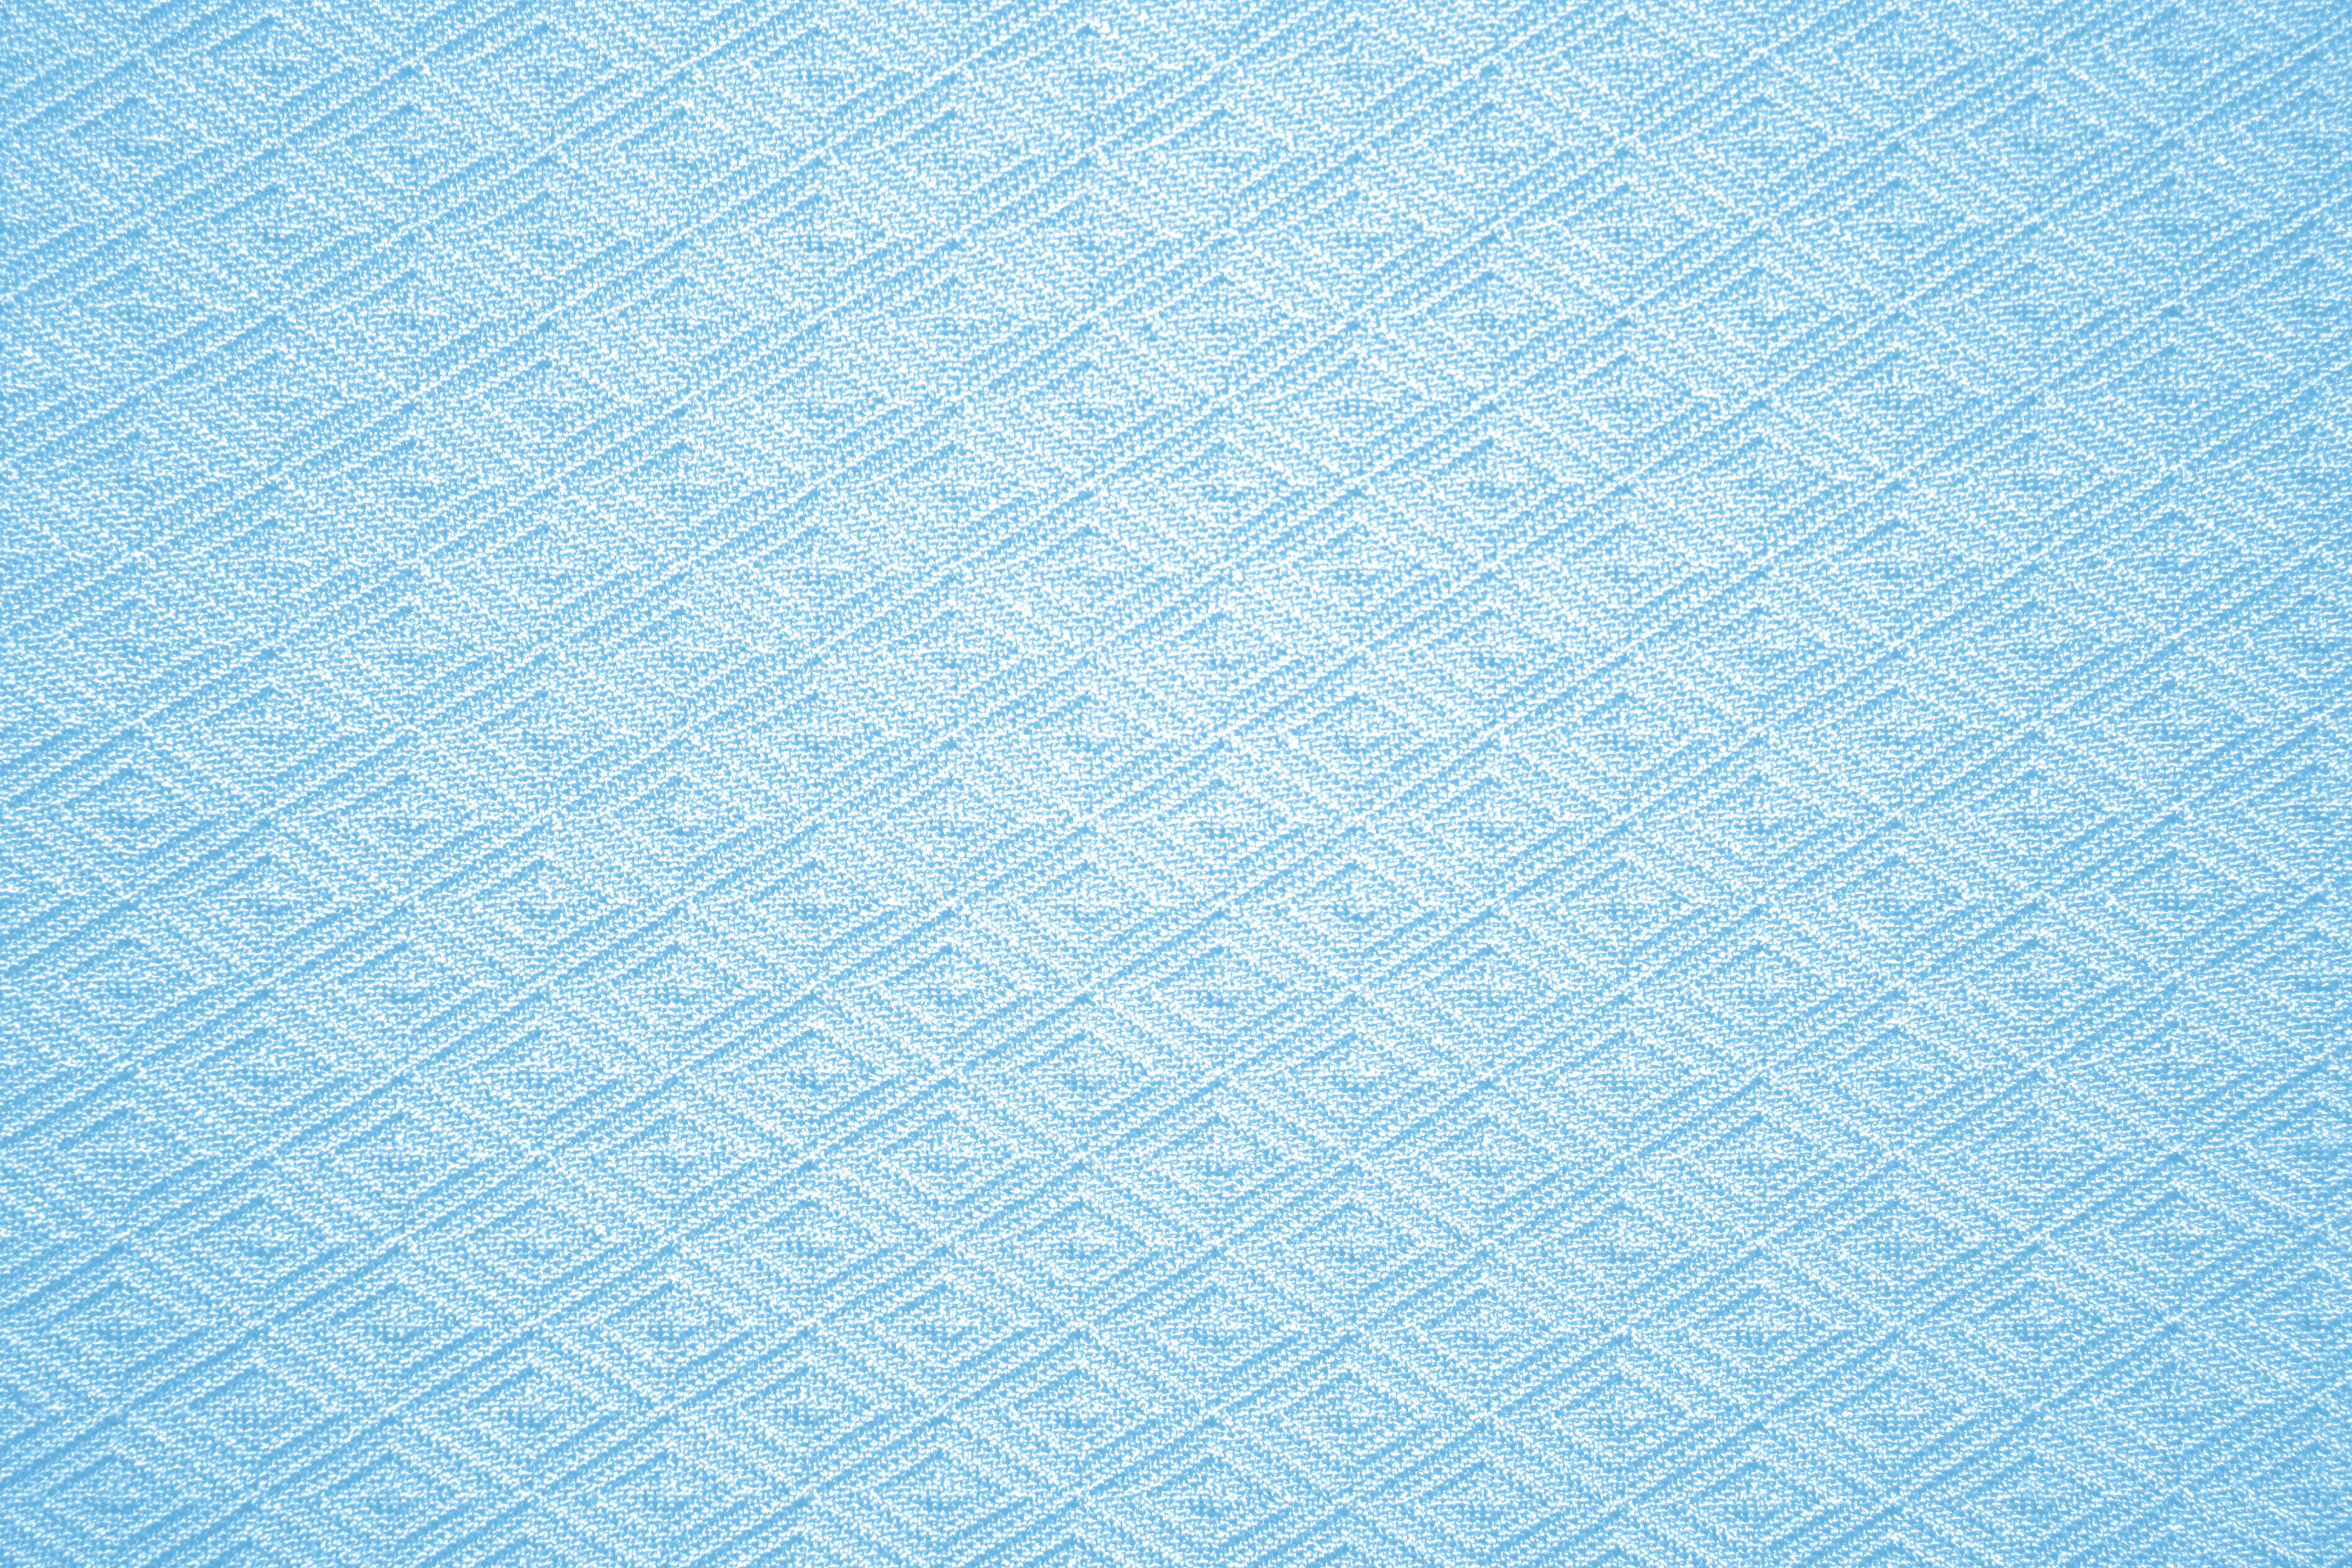 Free Download Baby Blue Knit Fabric With Diamond Pattern